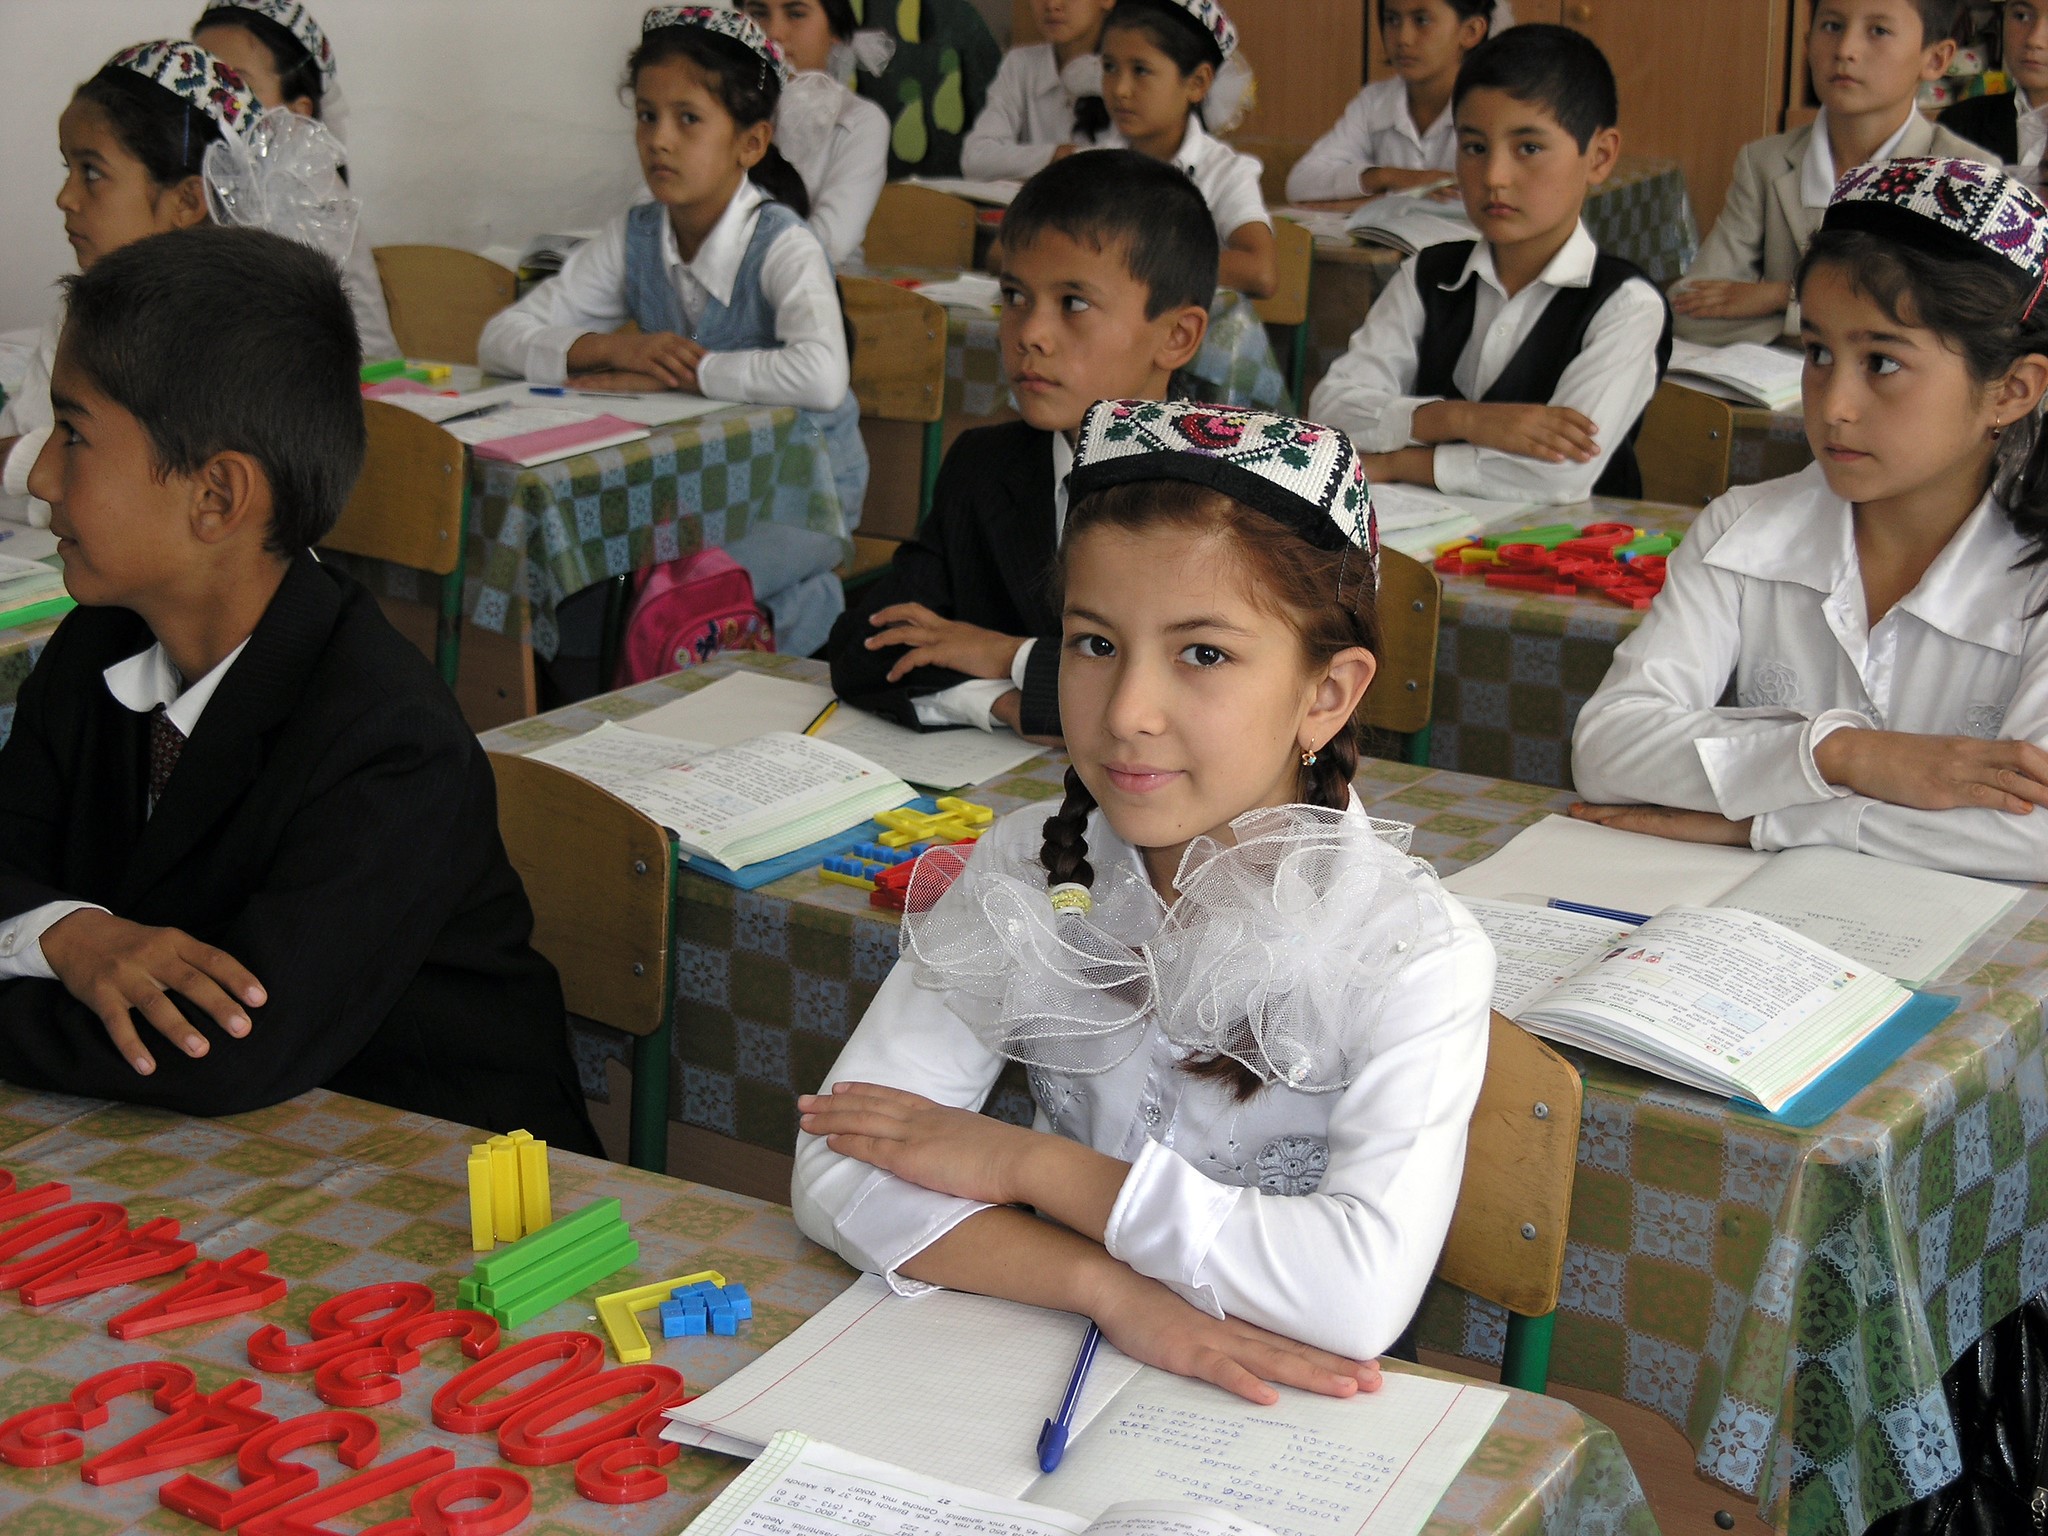 8 Facts About Education In Turkmenistan | The Borgen Project